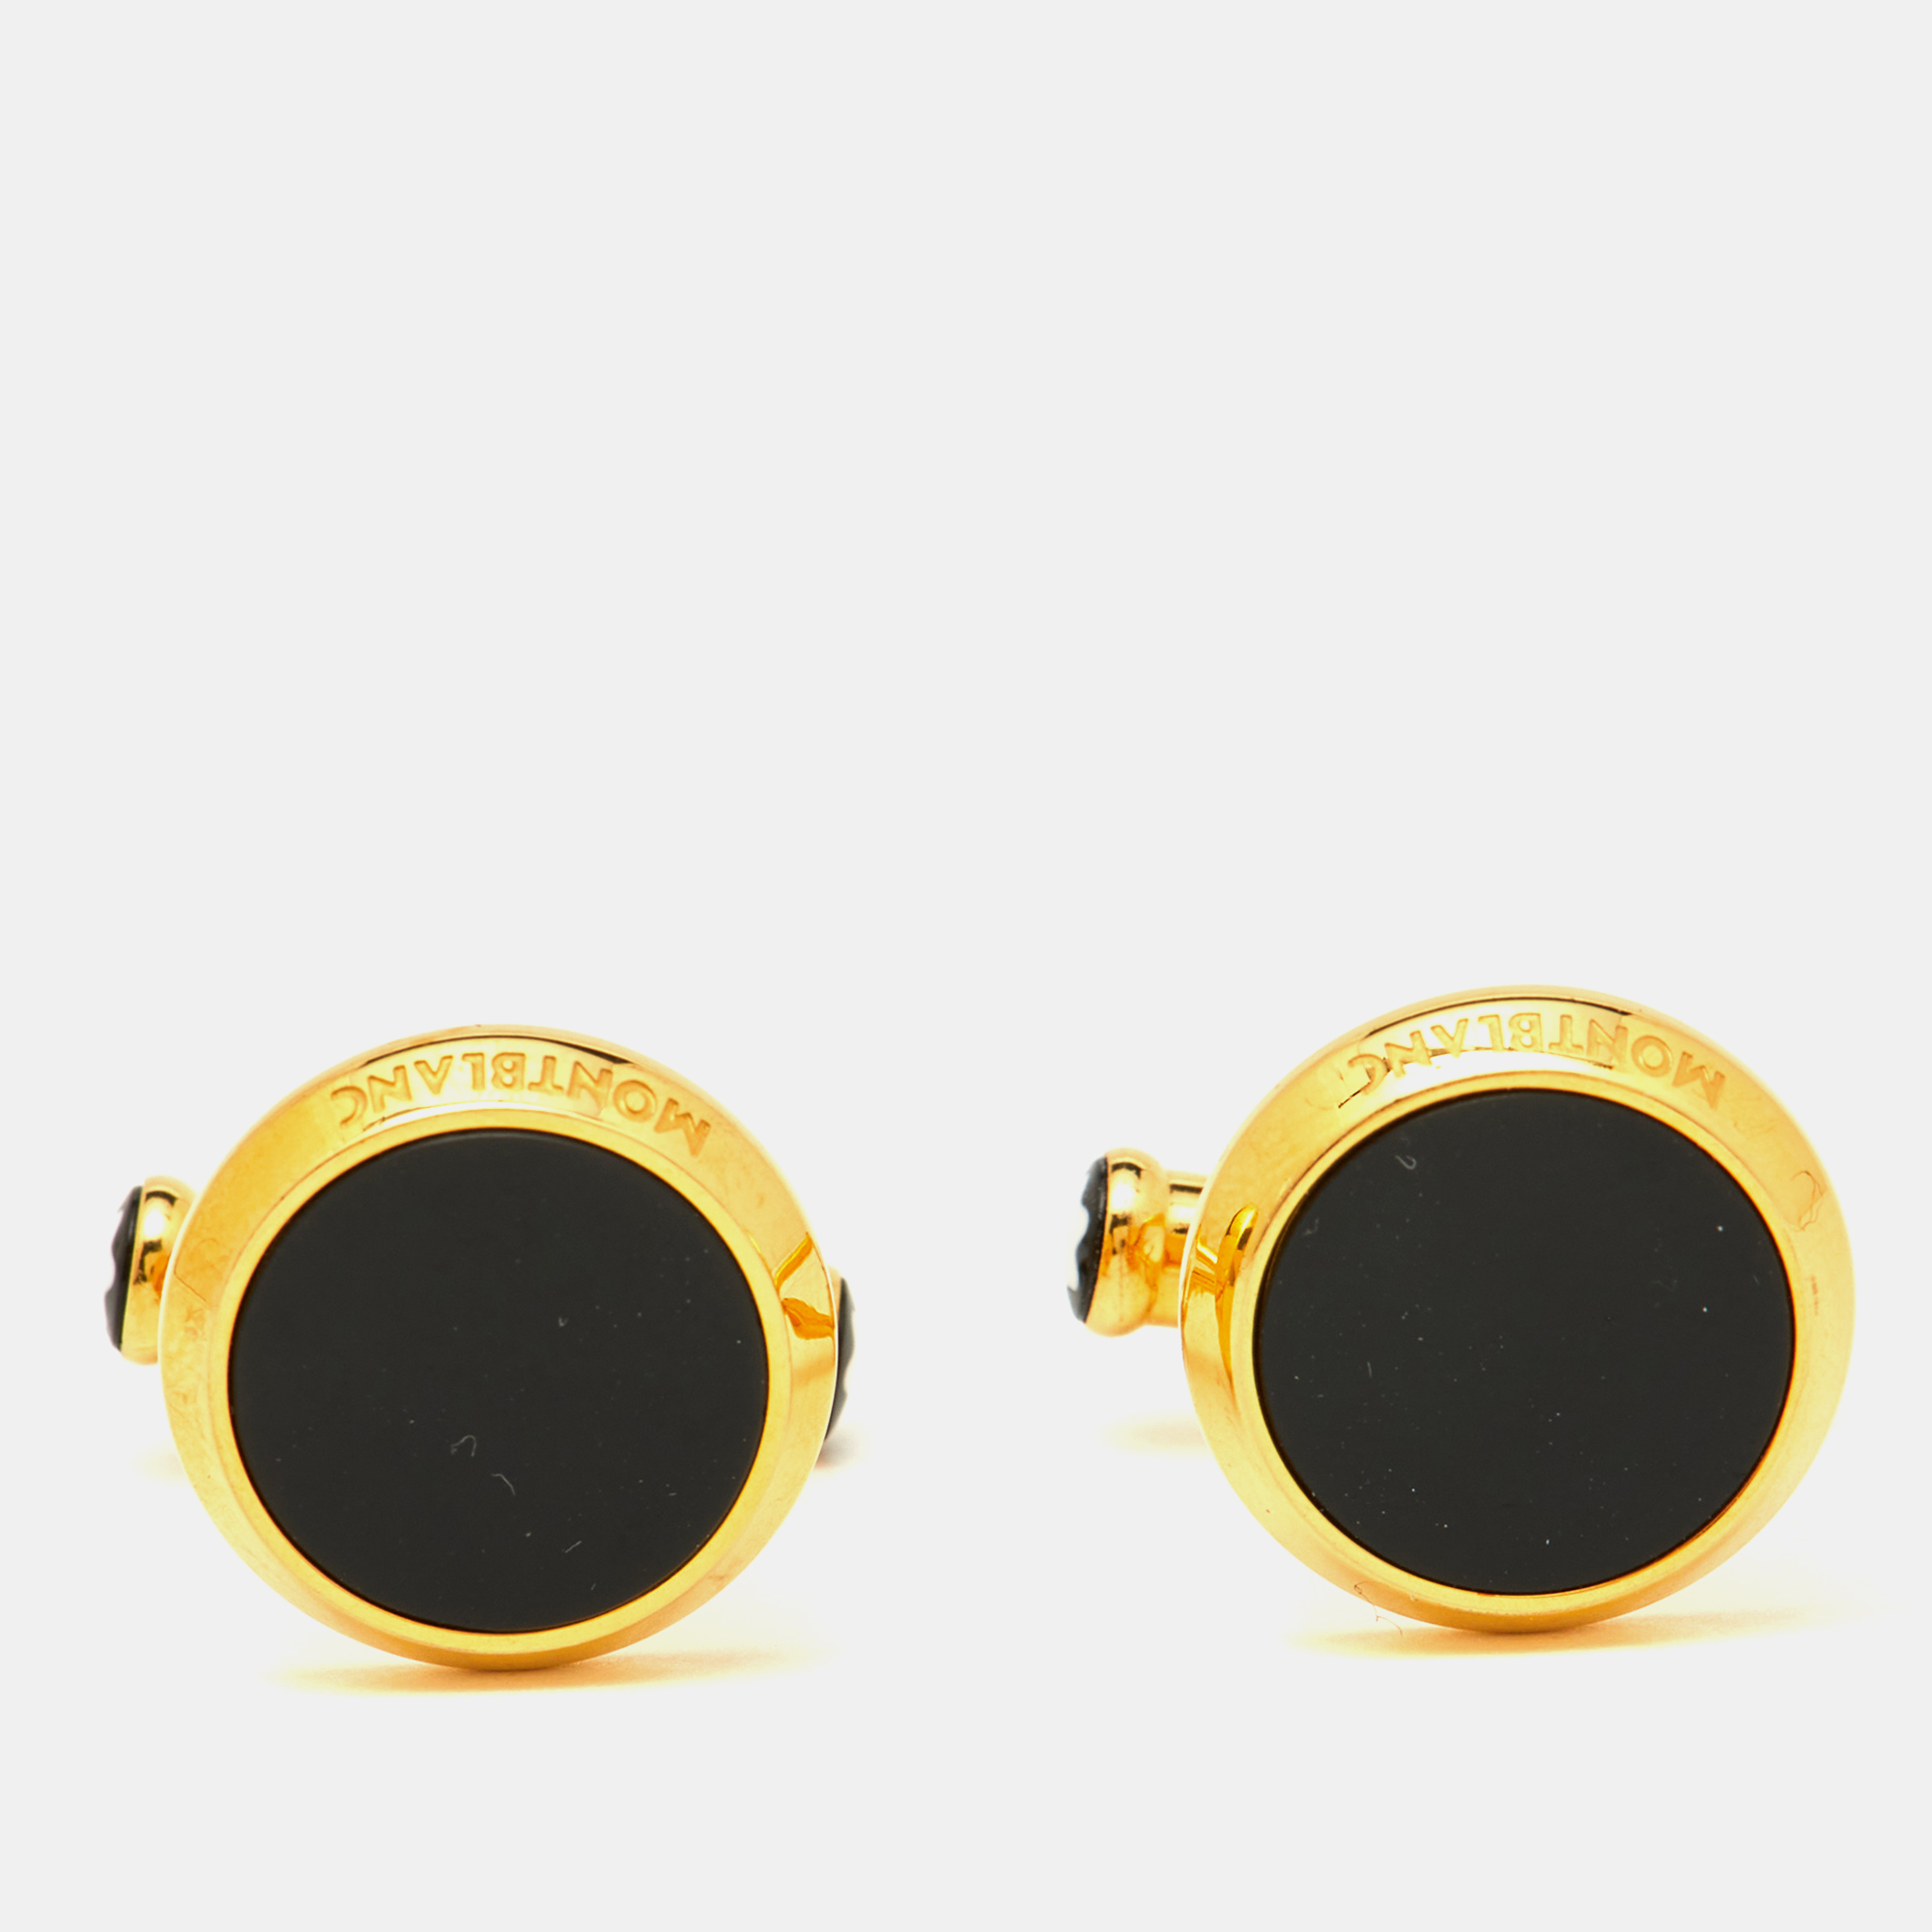 Pre-owned Montblanc Meisterstuck Onyx Gold Tone Cufflinks